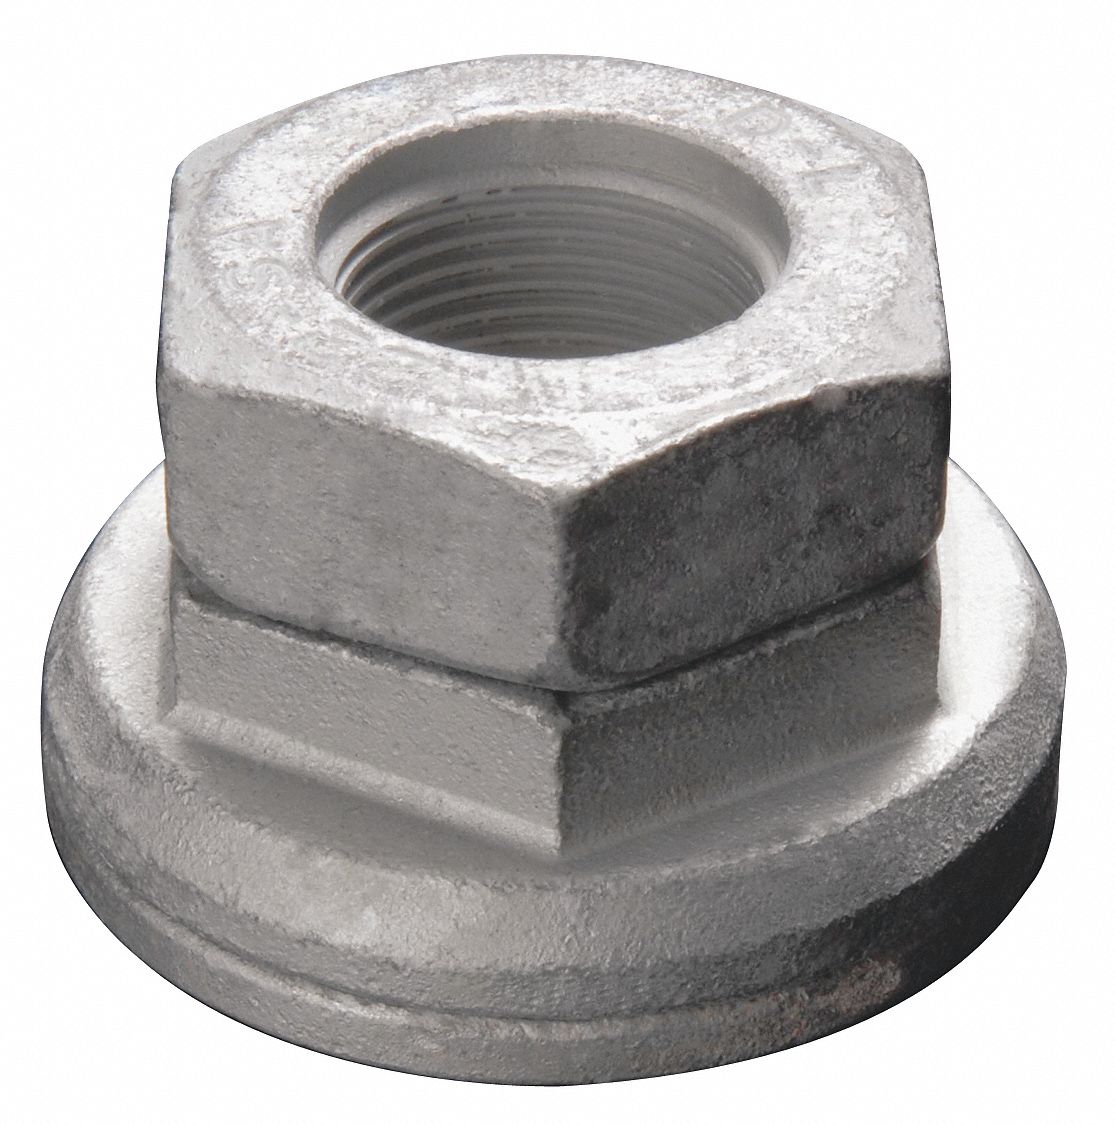 Pack of 5 Right Hand Class 10 Steel Package of 50 M14-2.00 Nylon Insert Lock Nut D985 Zinc Plated Finish 